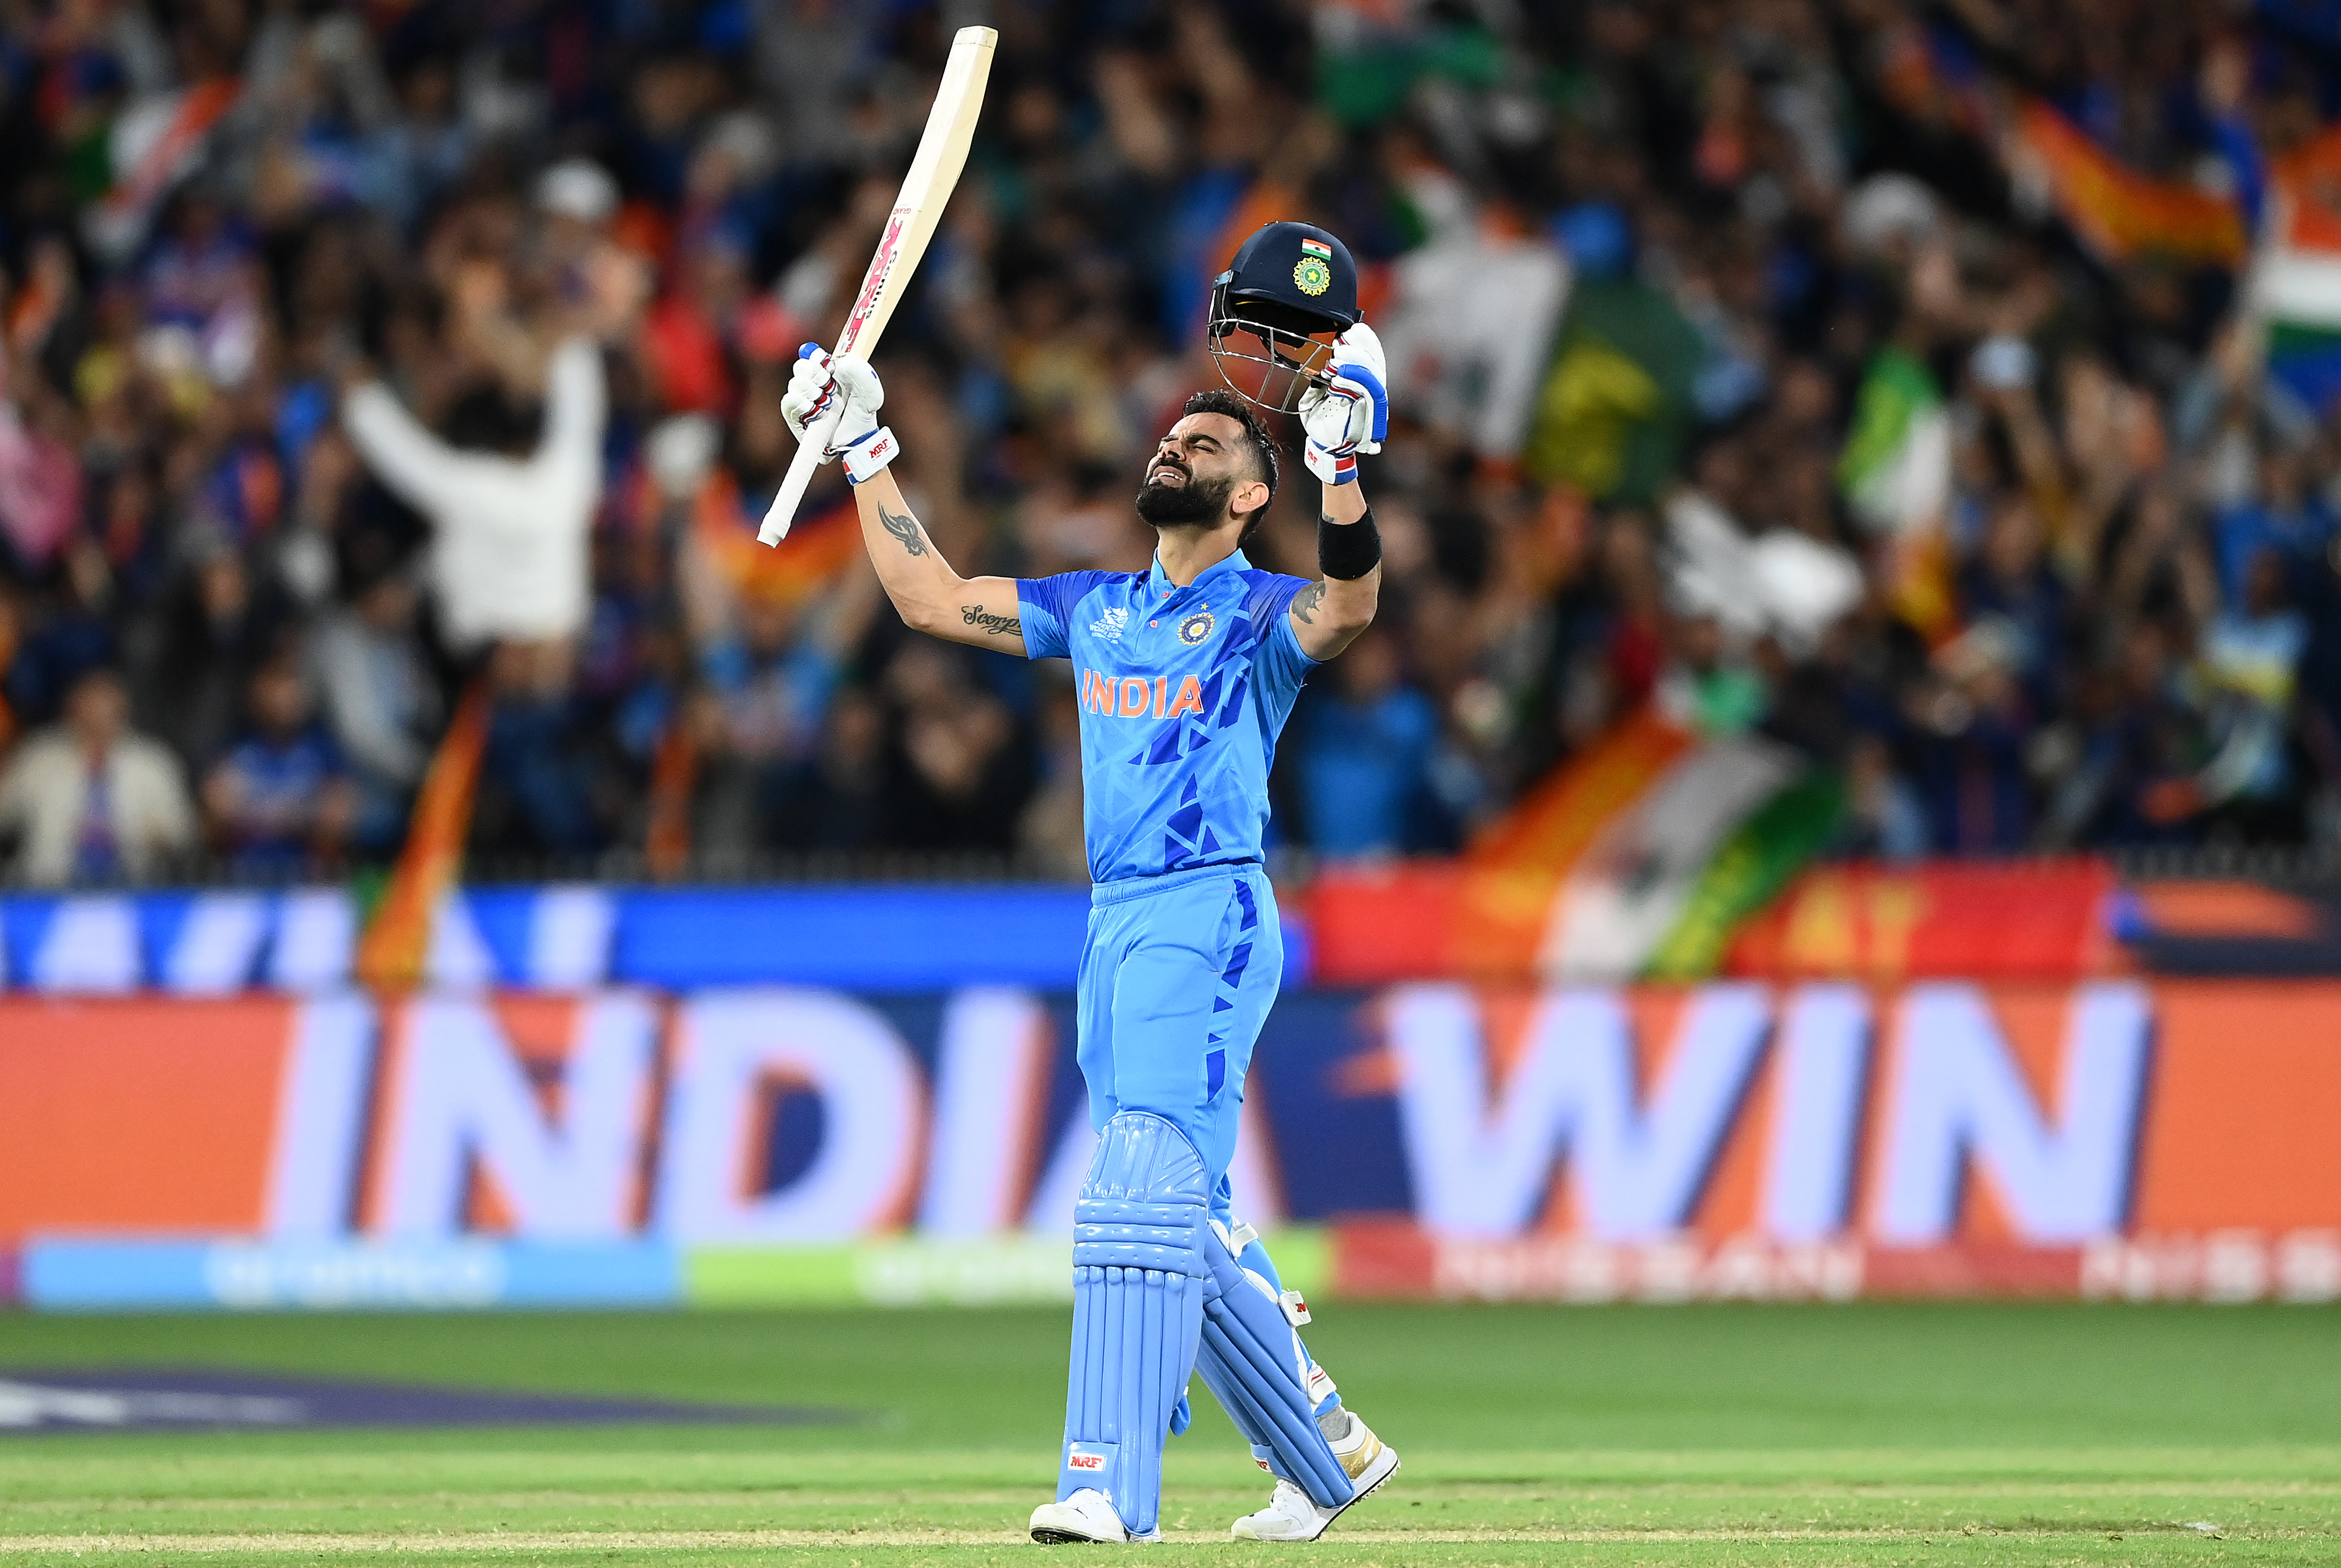 ICC World T20 | Twitter reacts to Virat Kohli’s audacious six over Haris Rauf’s head leaving everyone in awe